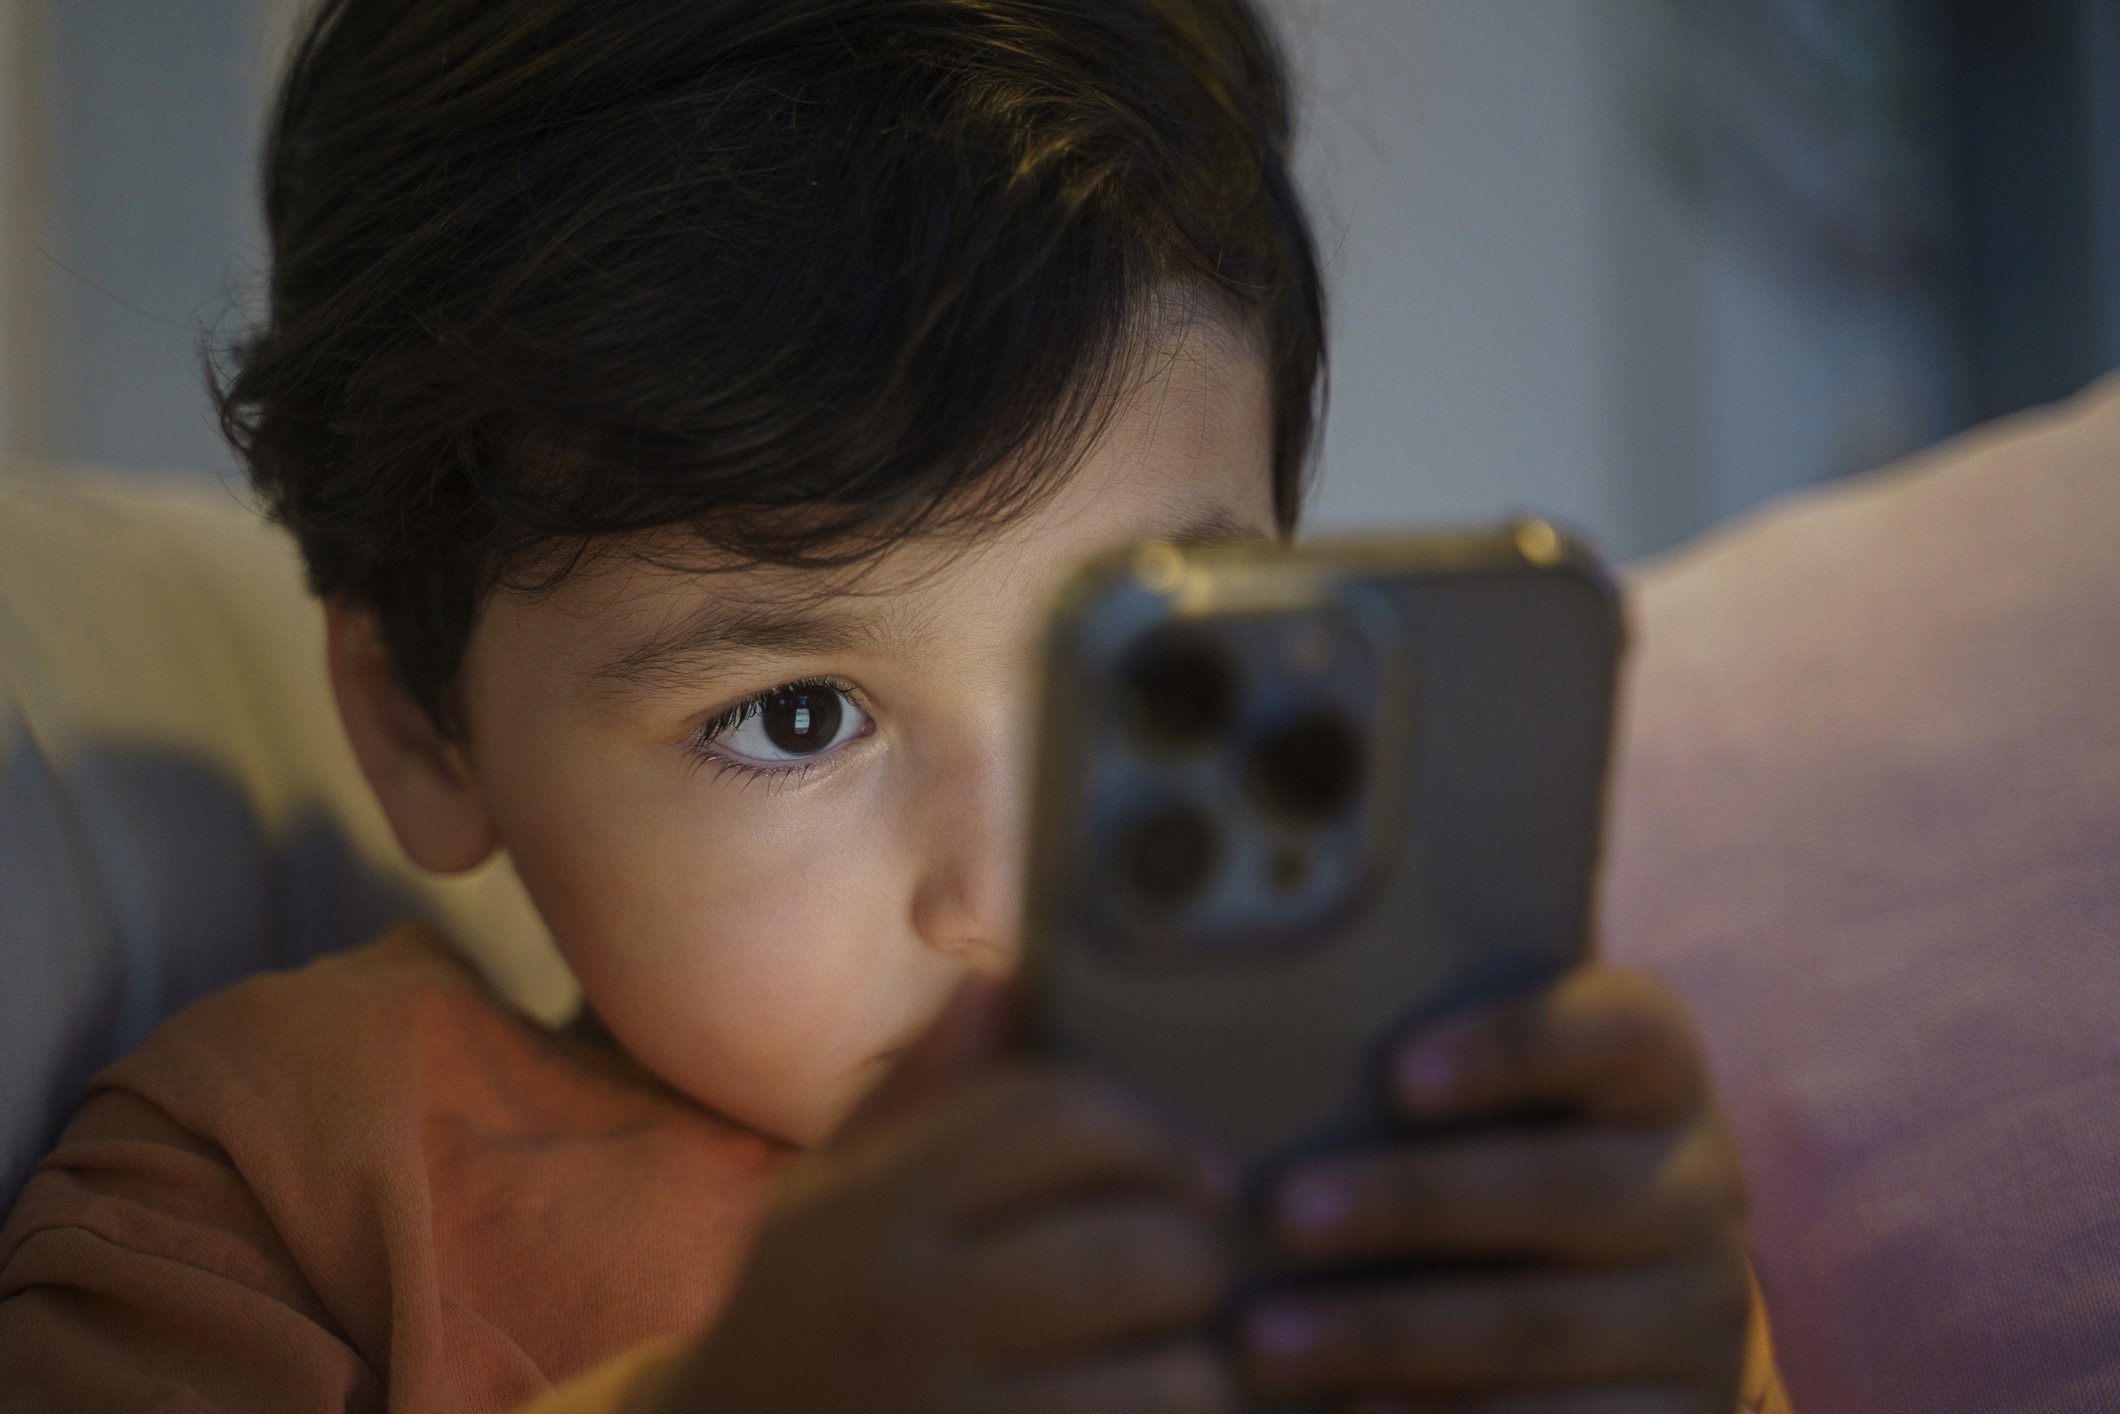 Child focused on using a smartphone, half-face visible